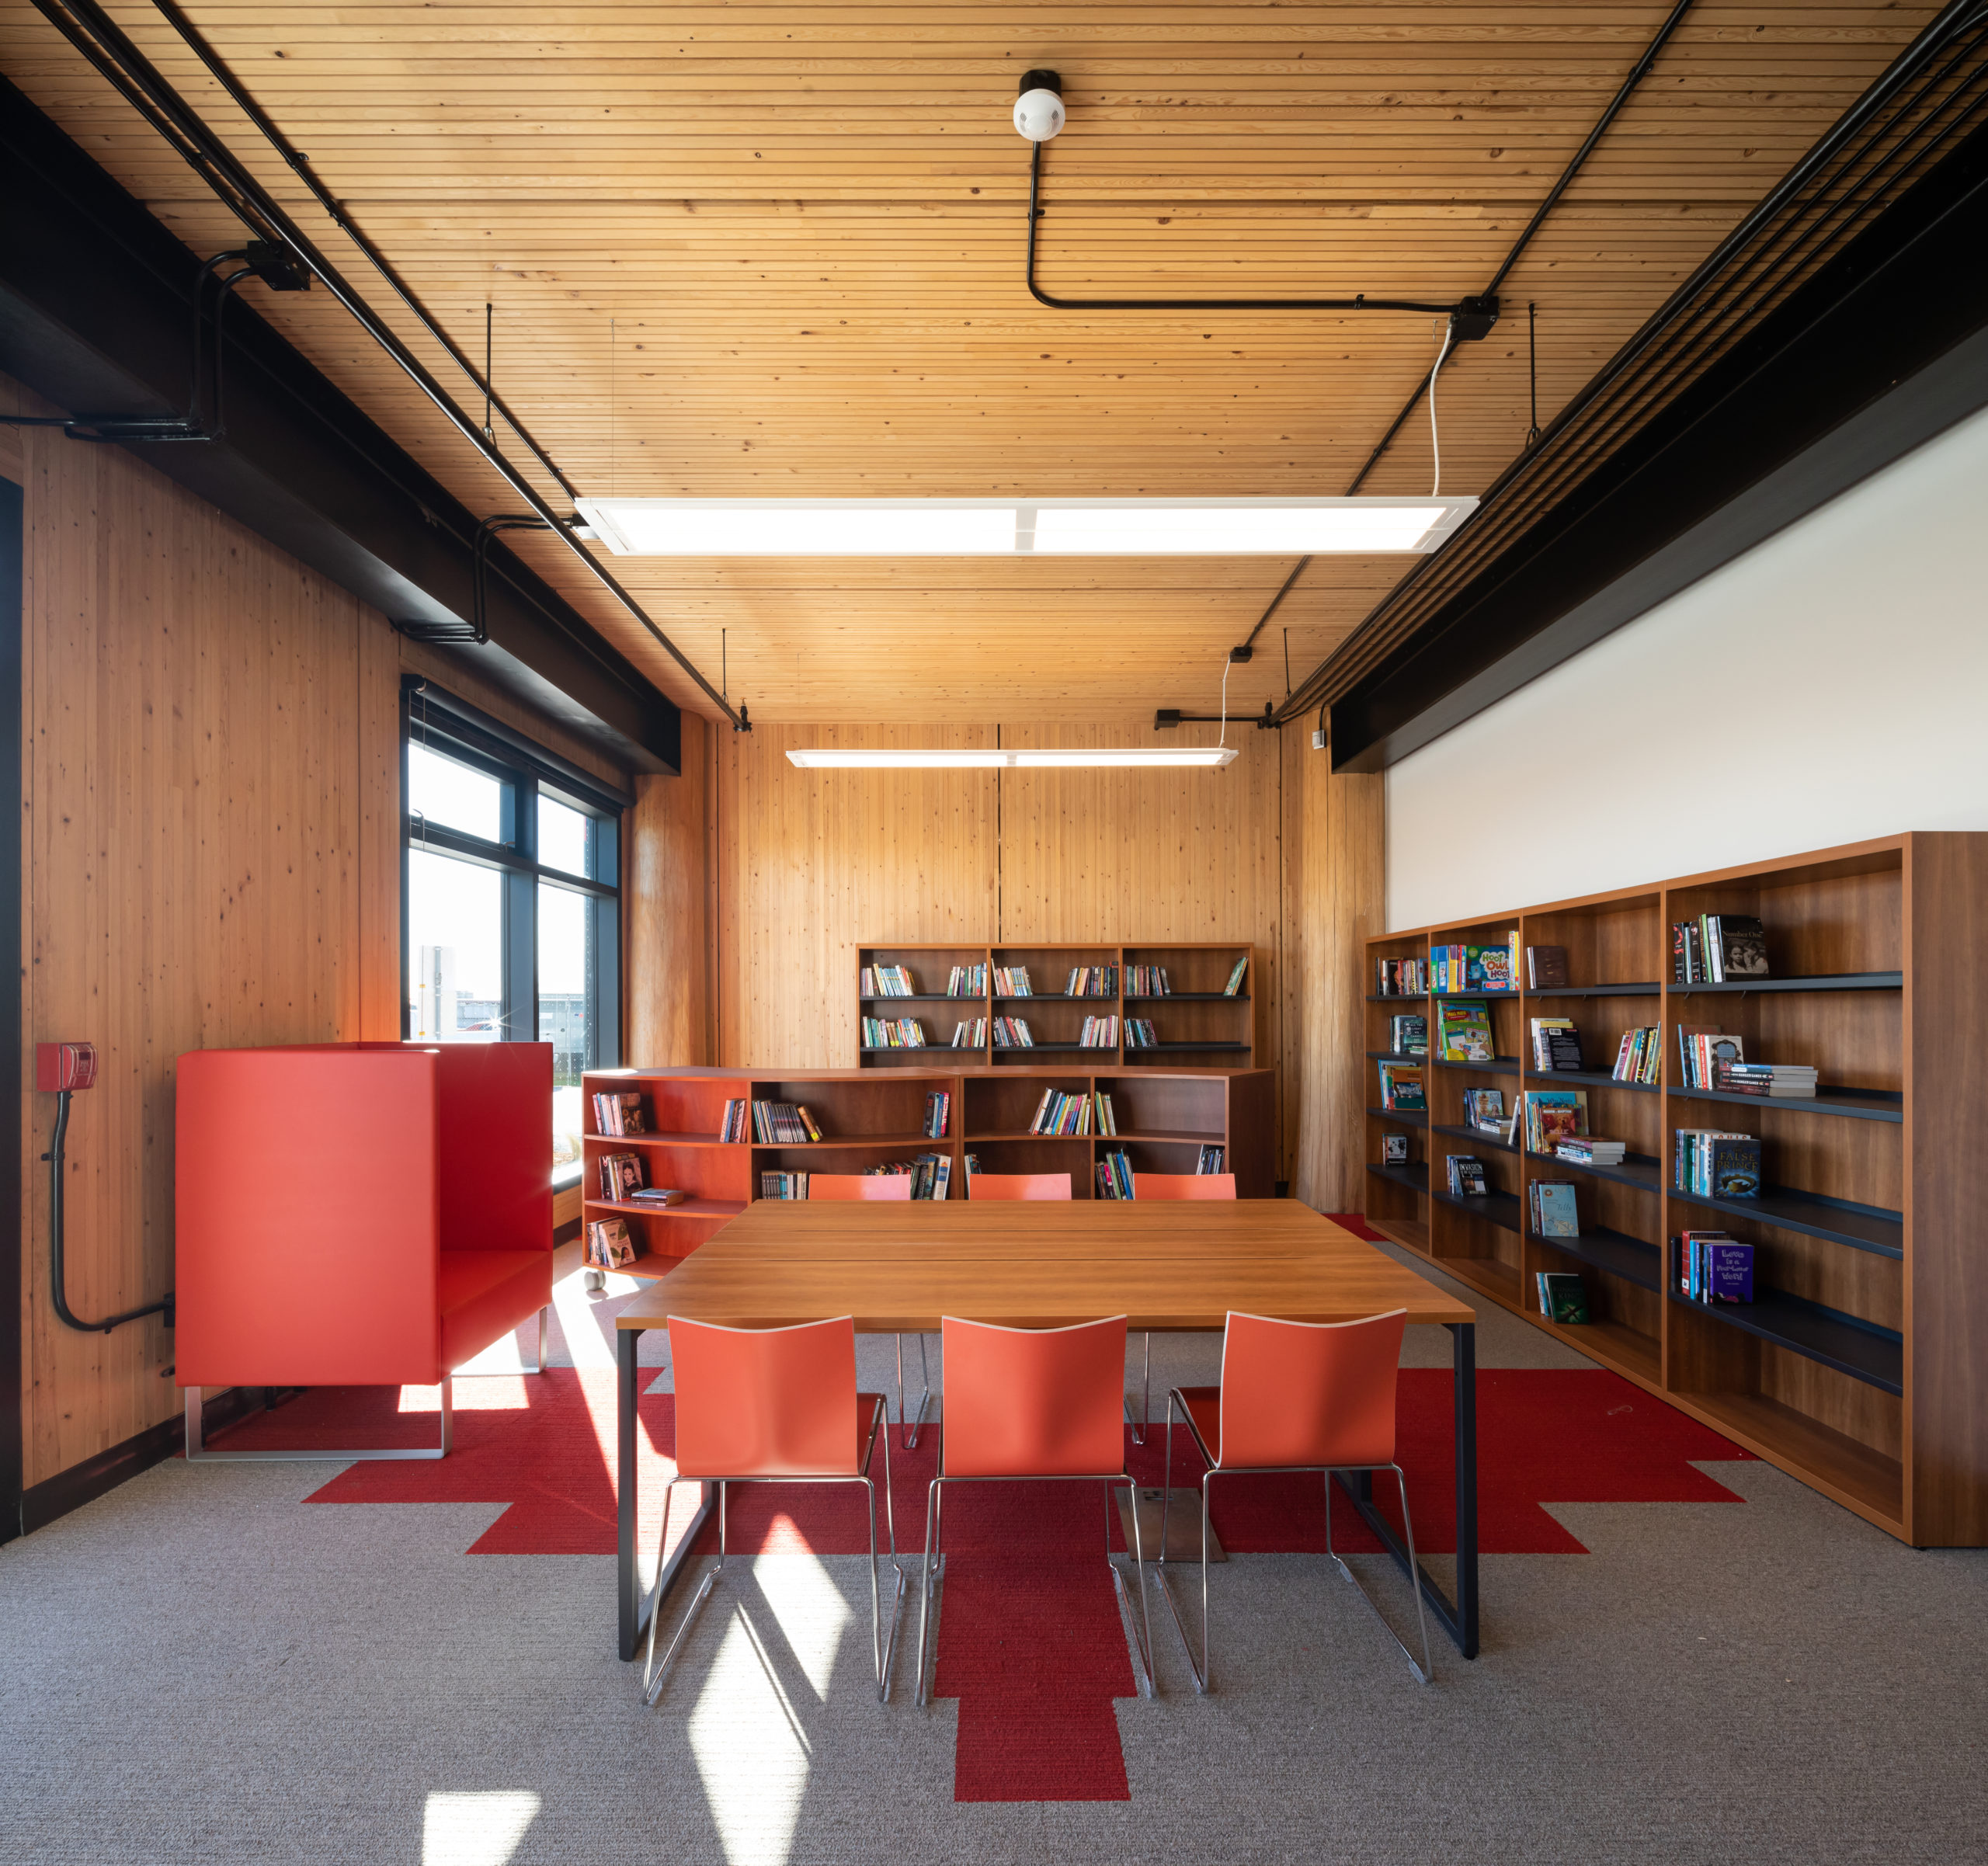 Interior view of library room with exposed wood walls, ceiling, wood book shelves against two walls opposite to a big window. Red accent chairs match the red shapes on the carpet.